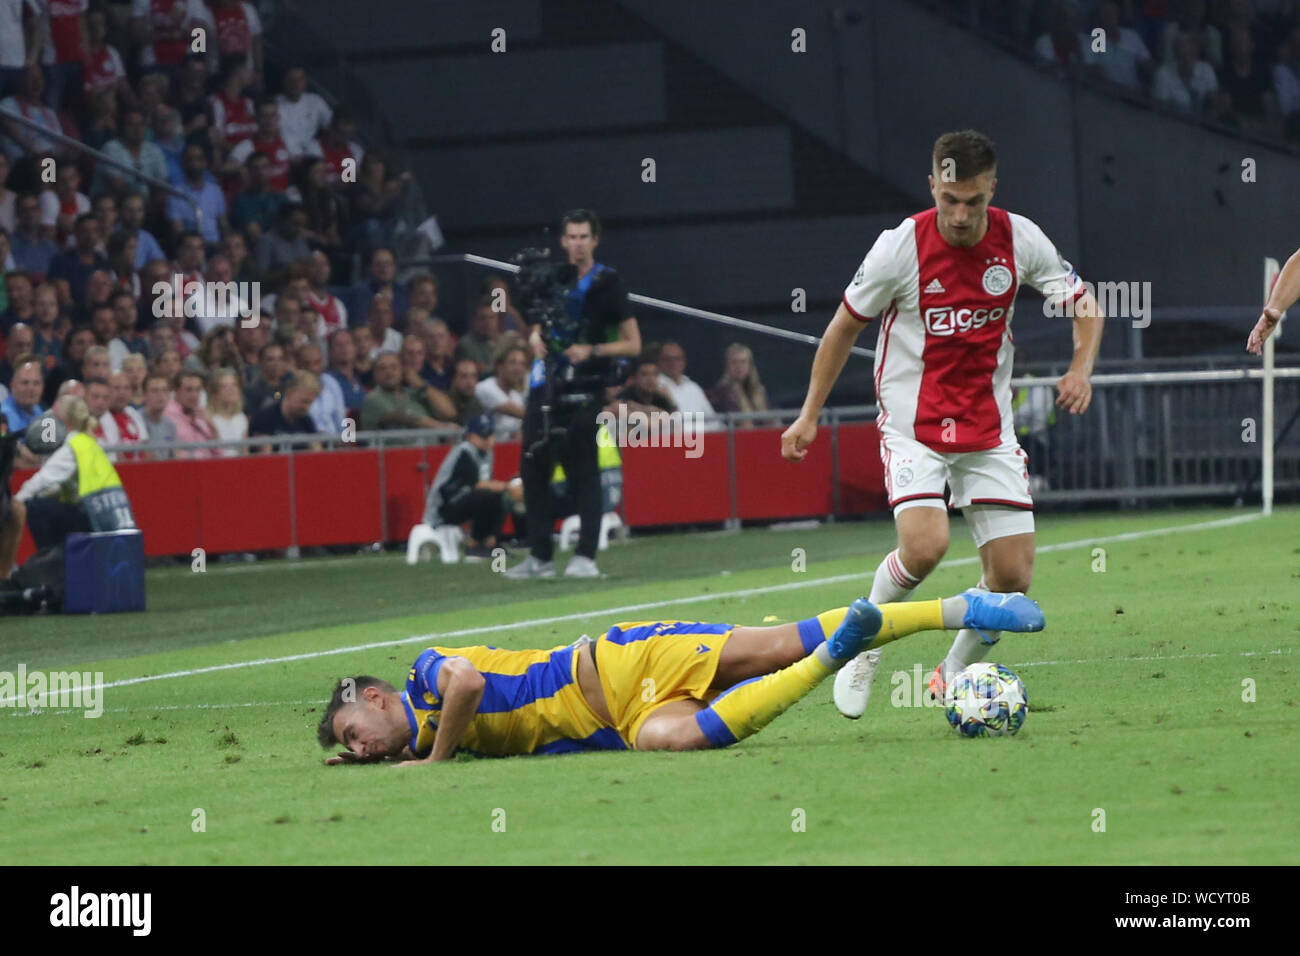 Amsterdam, Netherlands. 28th August, 2019. Joel Veltman (Ajax) controls for the ball during the second leg of the 2019/20 UEFA Champions League Final Final Qualifying Round fixture between AFC Ajax (Netherlands) and Apoel FC (Cyprus) at Johan Cruijff ArenA. Credit: Federico Guerra Maranesi/ZUMA Wire/Alamy Live News Stock Photo